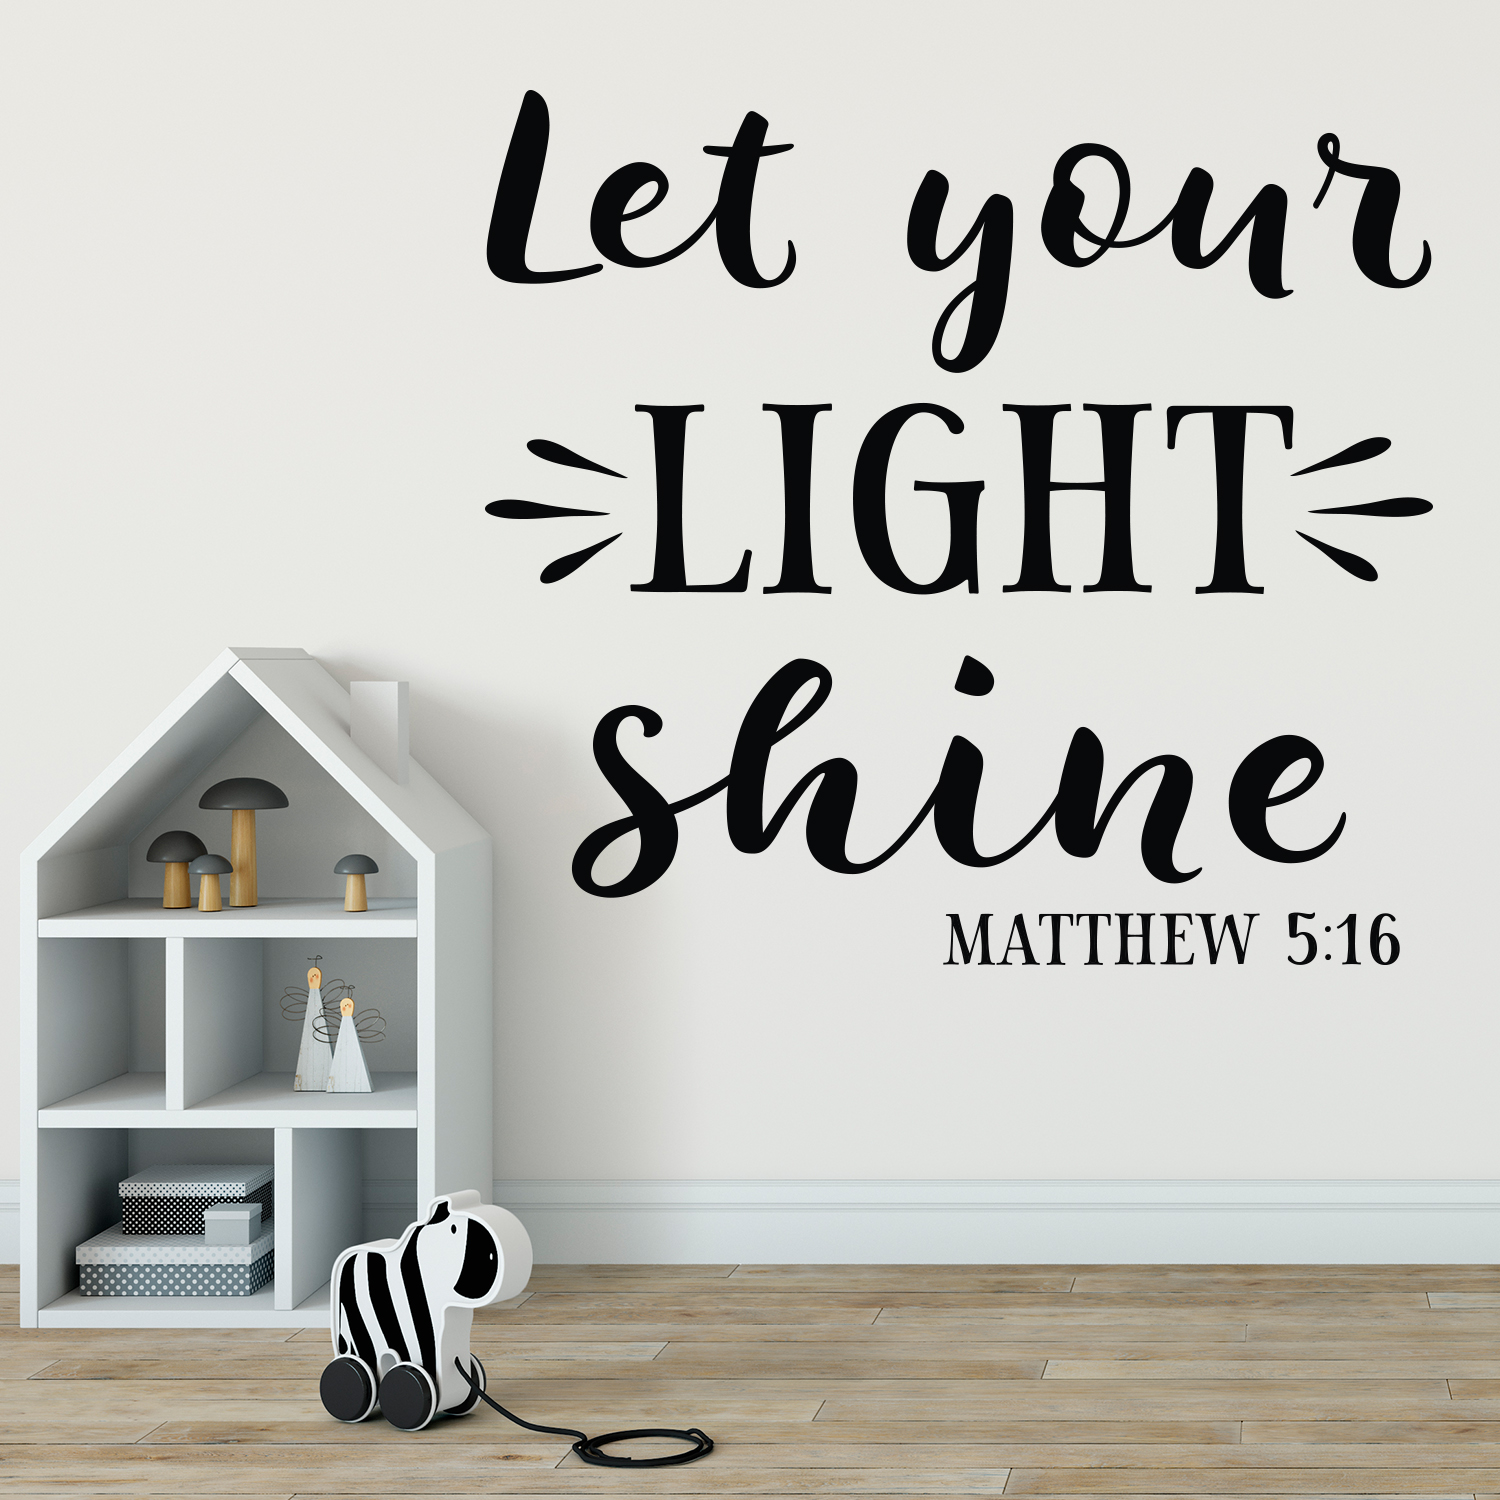 Matthew 5v16 Vinyl Wall Decal 2 Let Your Light Shine You Will Find Refuge